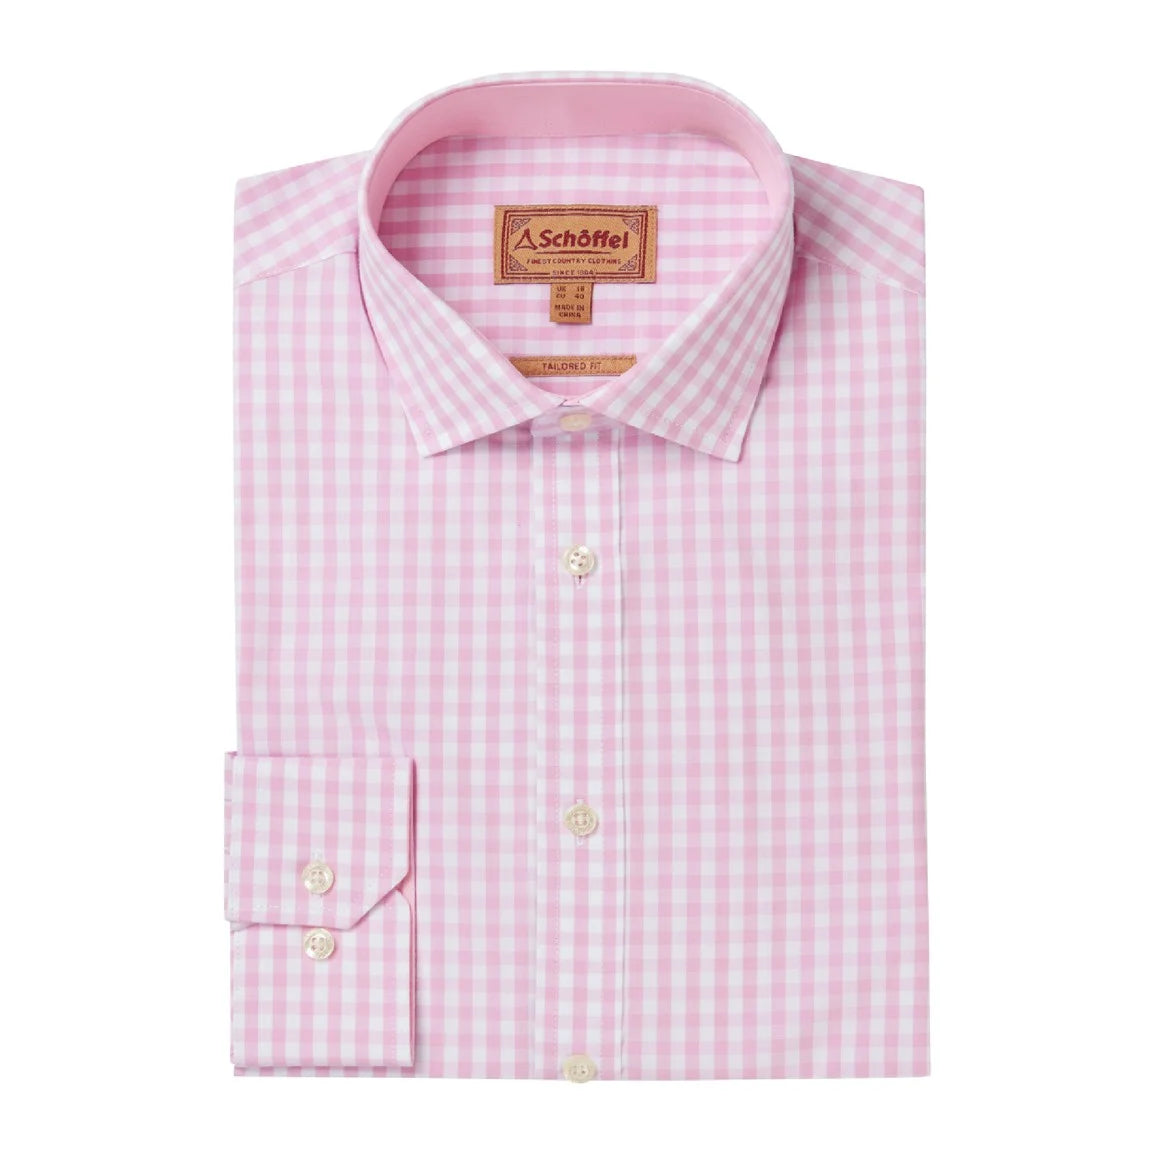 Schoffel Mens Thorpeness Tailored Shirt - Pink Check